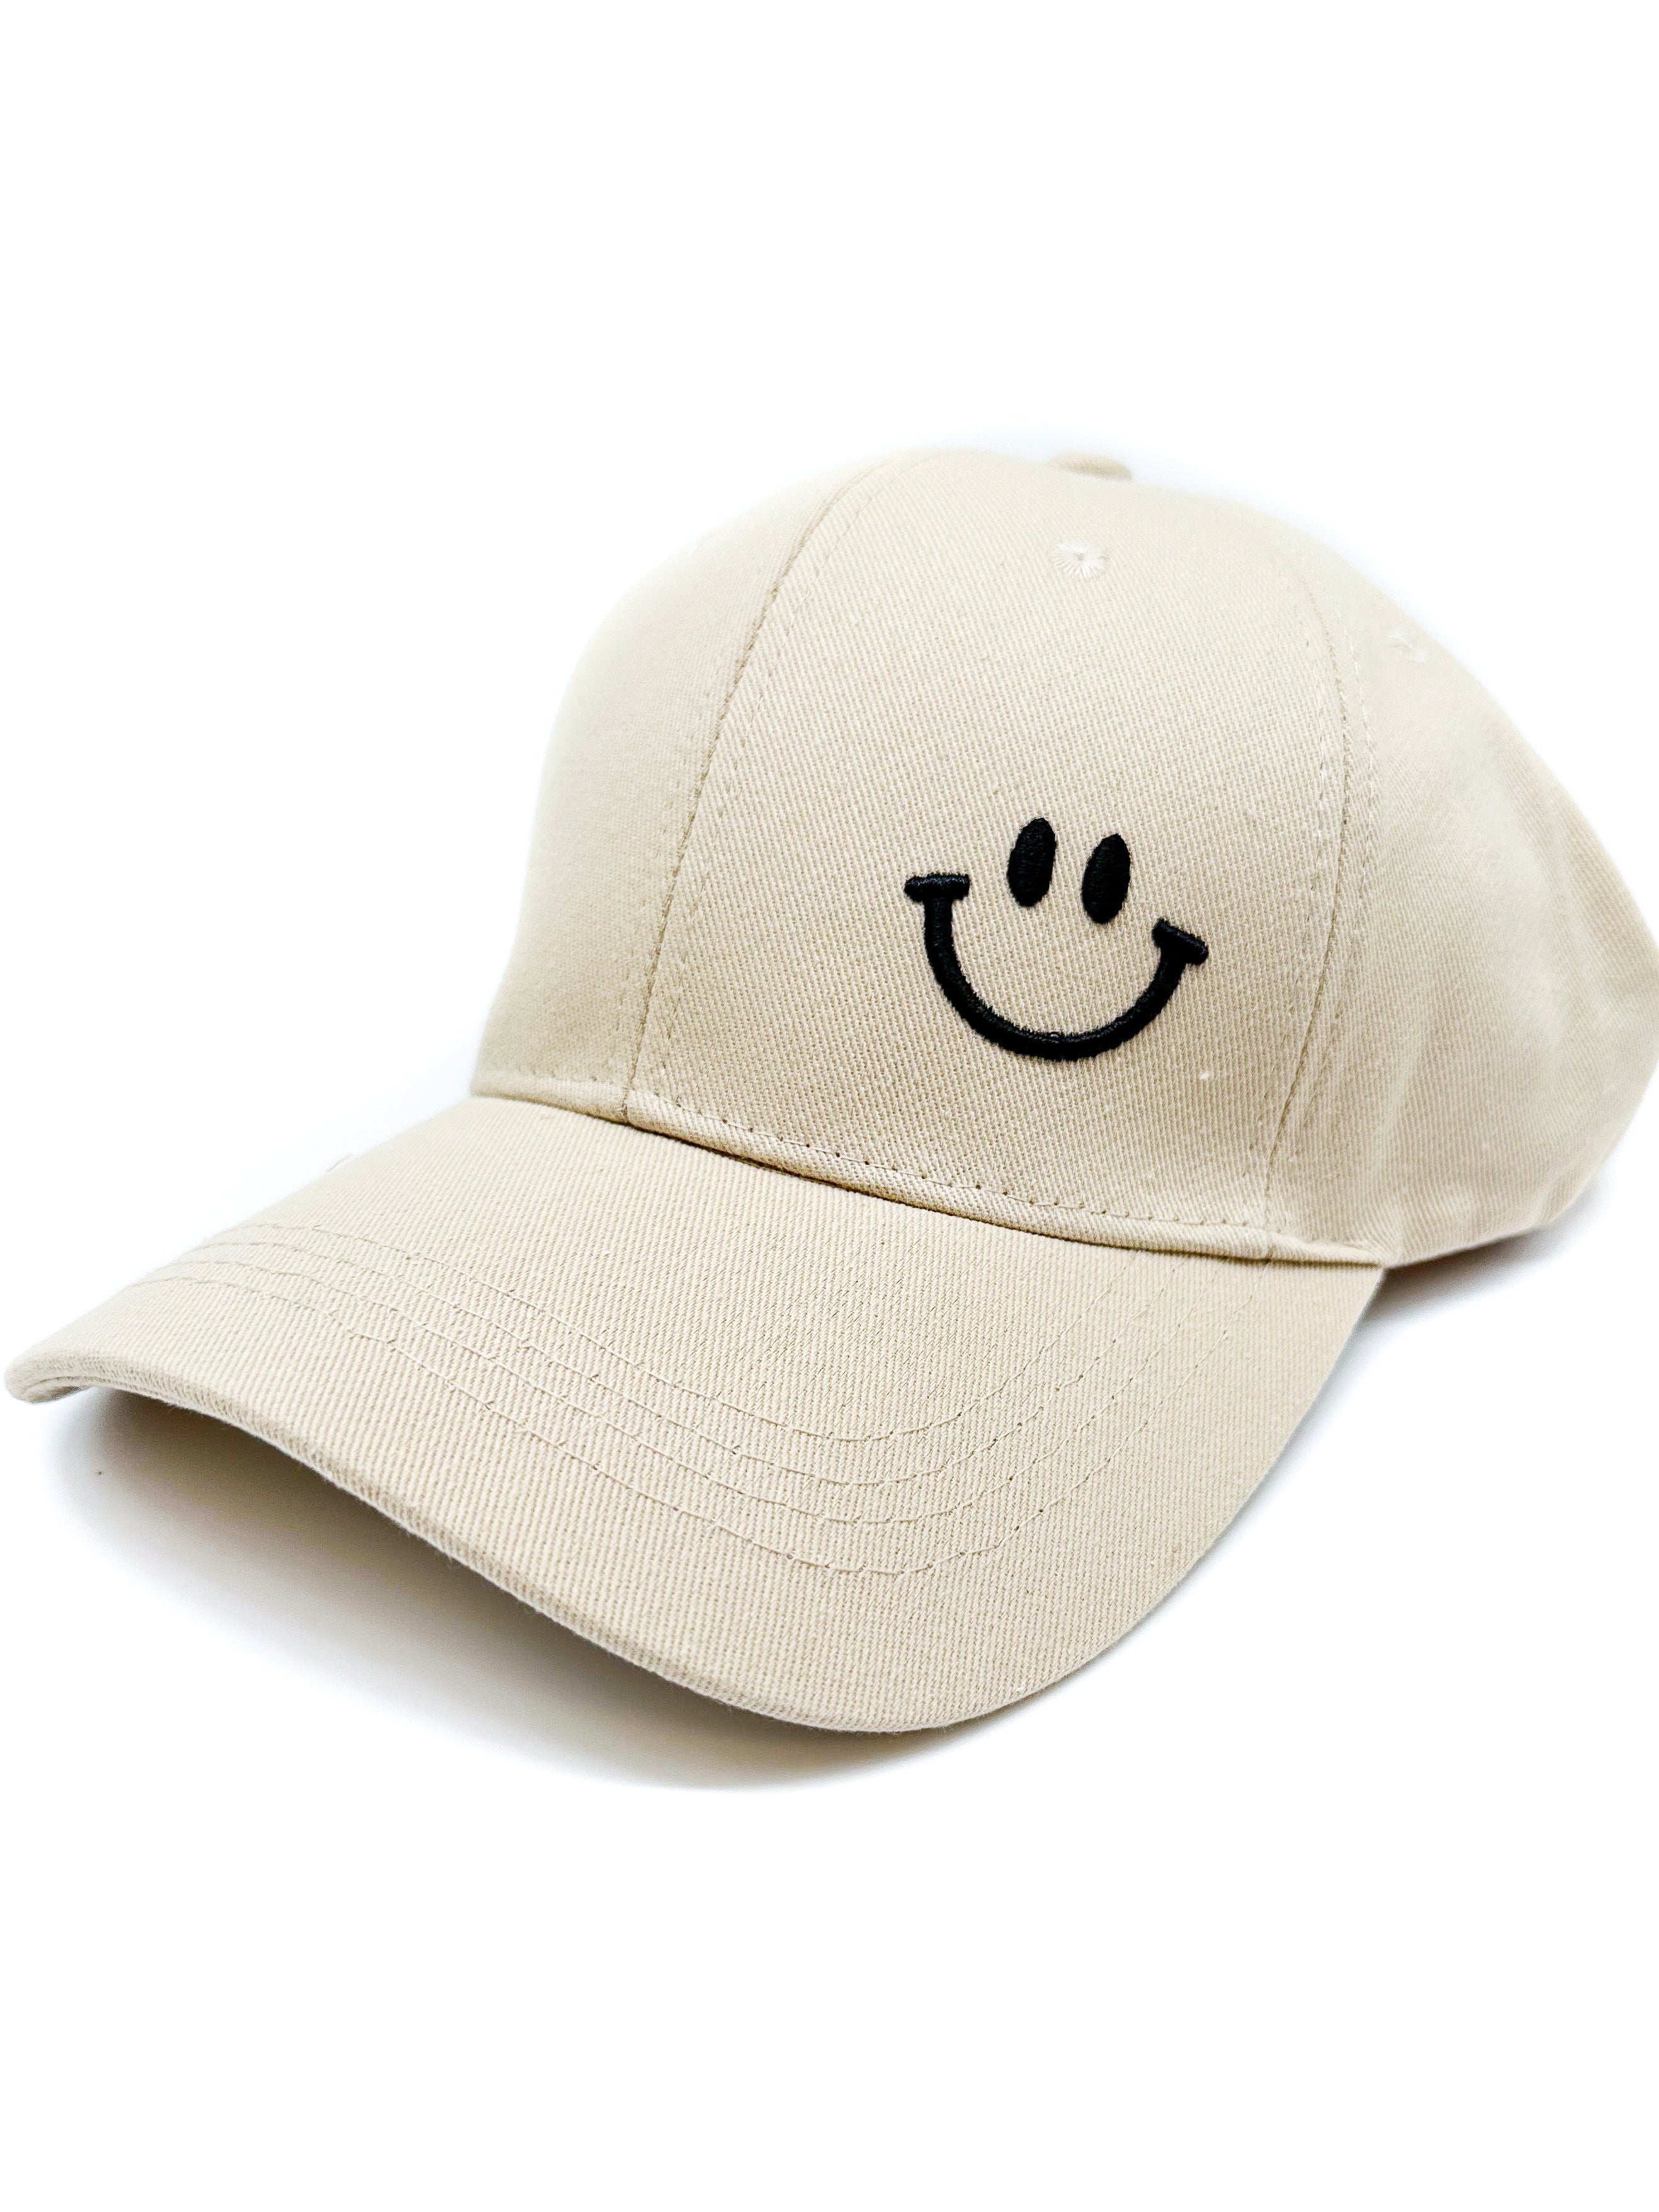 Say It With A Smile Ball Cap